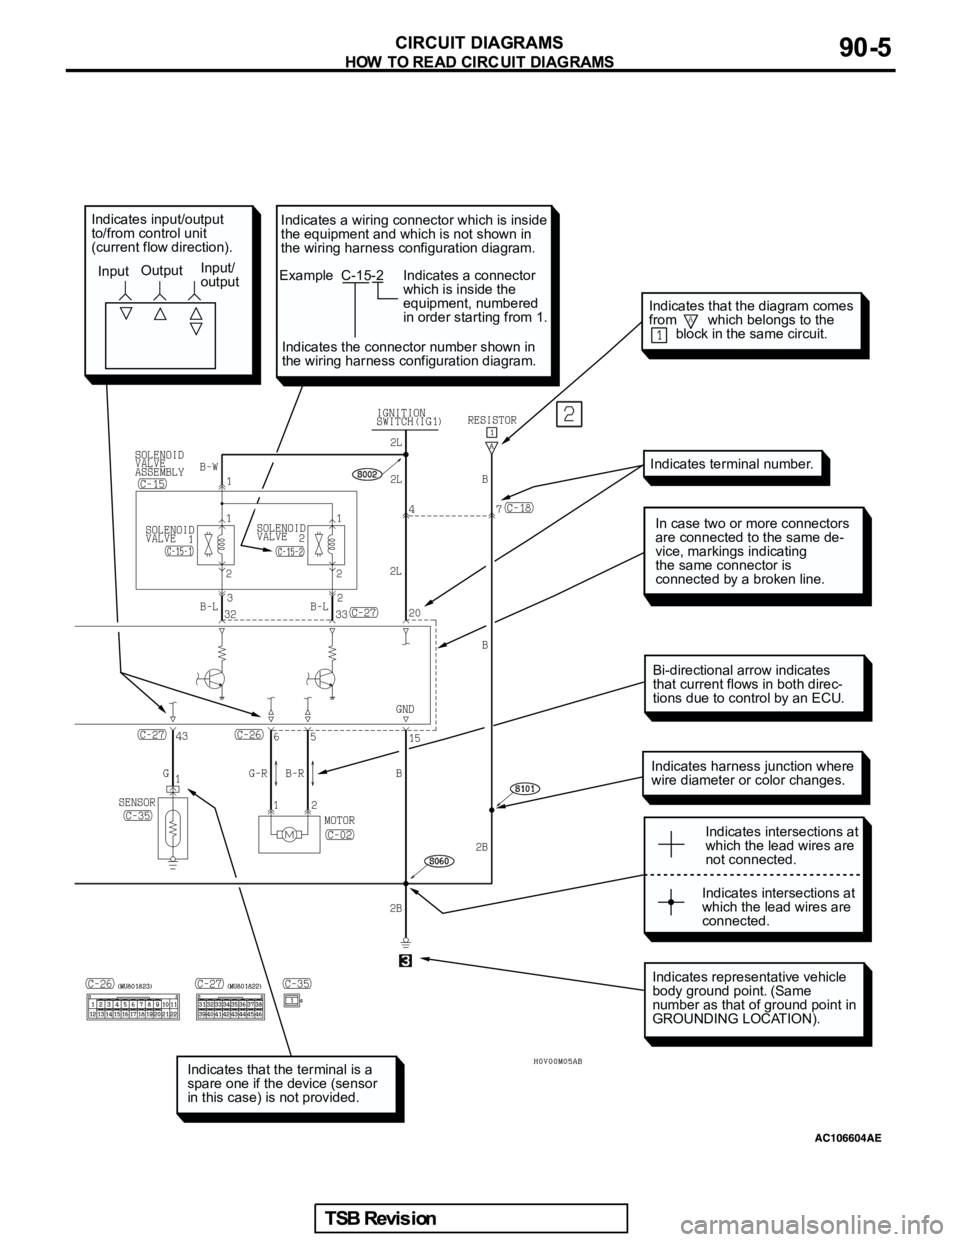 MITSUBISHI GALANT 2005  Service Repair Manual Indicates representative vehicle 
body ground point. (Same 
number as that of ground point in 
GROUNDING LOCATION).
Indicates harness junction where
wire diameter or color changes.
In case two or more